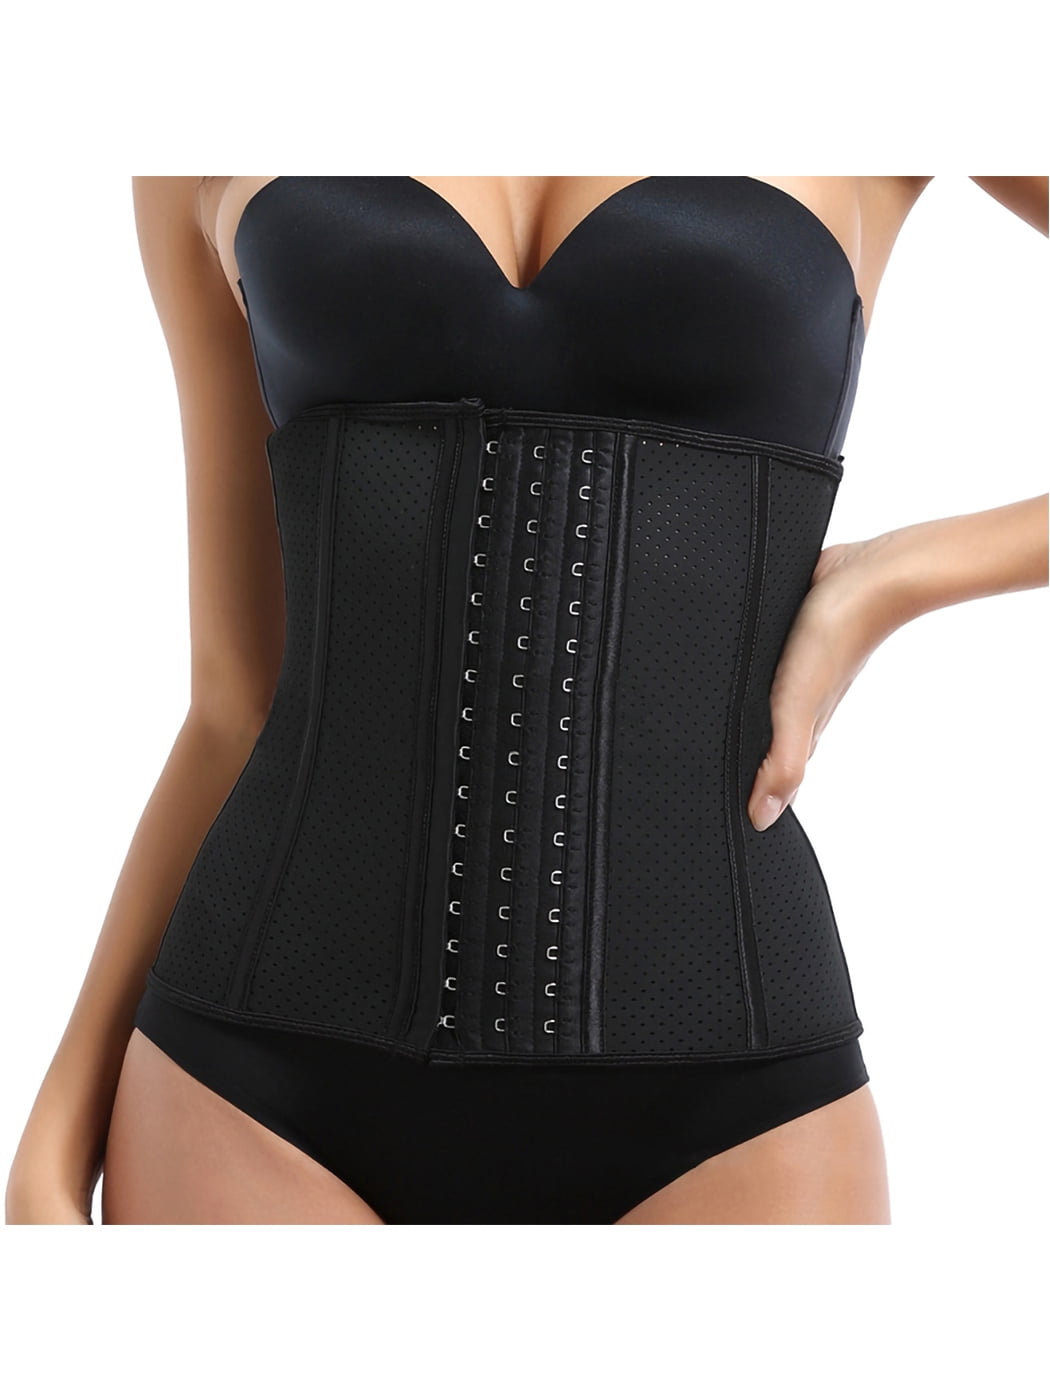 LODAY Waist Trainer Corset for Weight Loss Tummy Control Sport Workout Body Shaper Black 